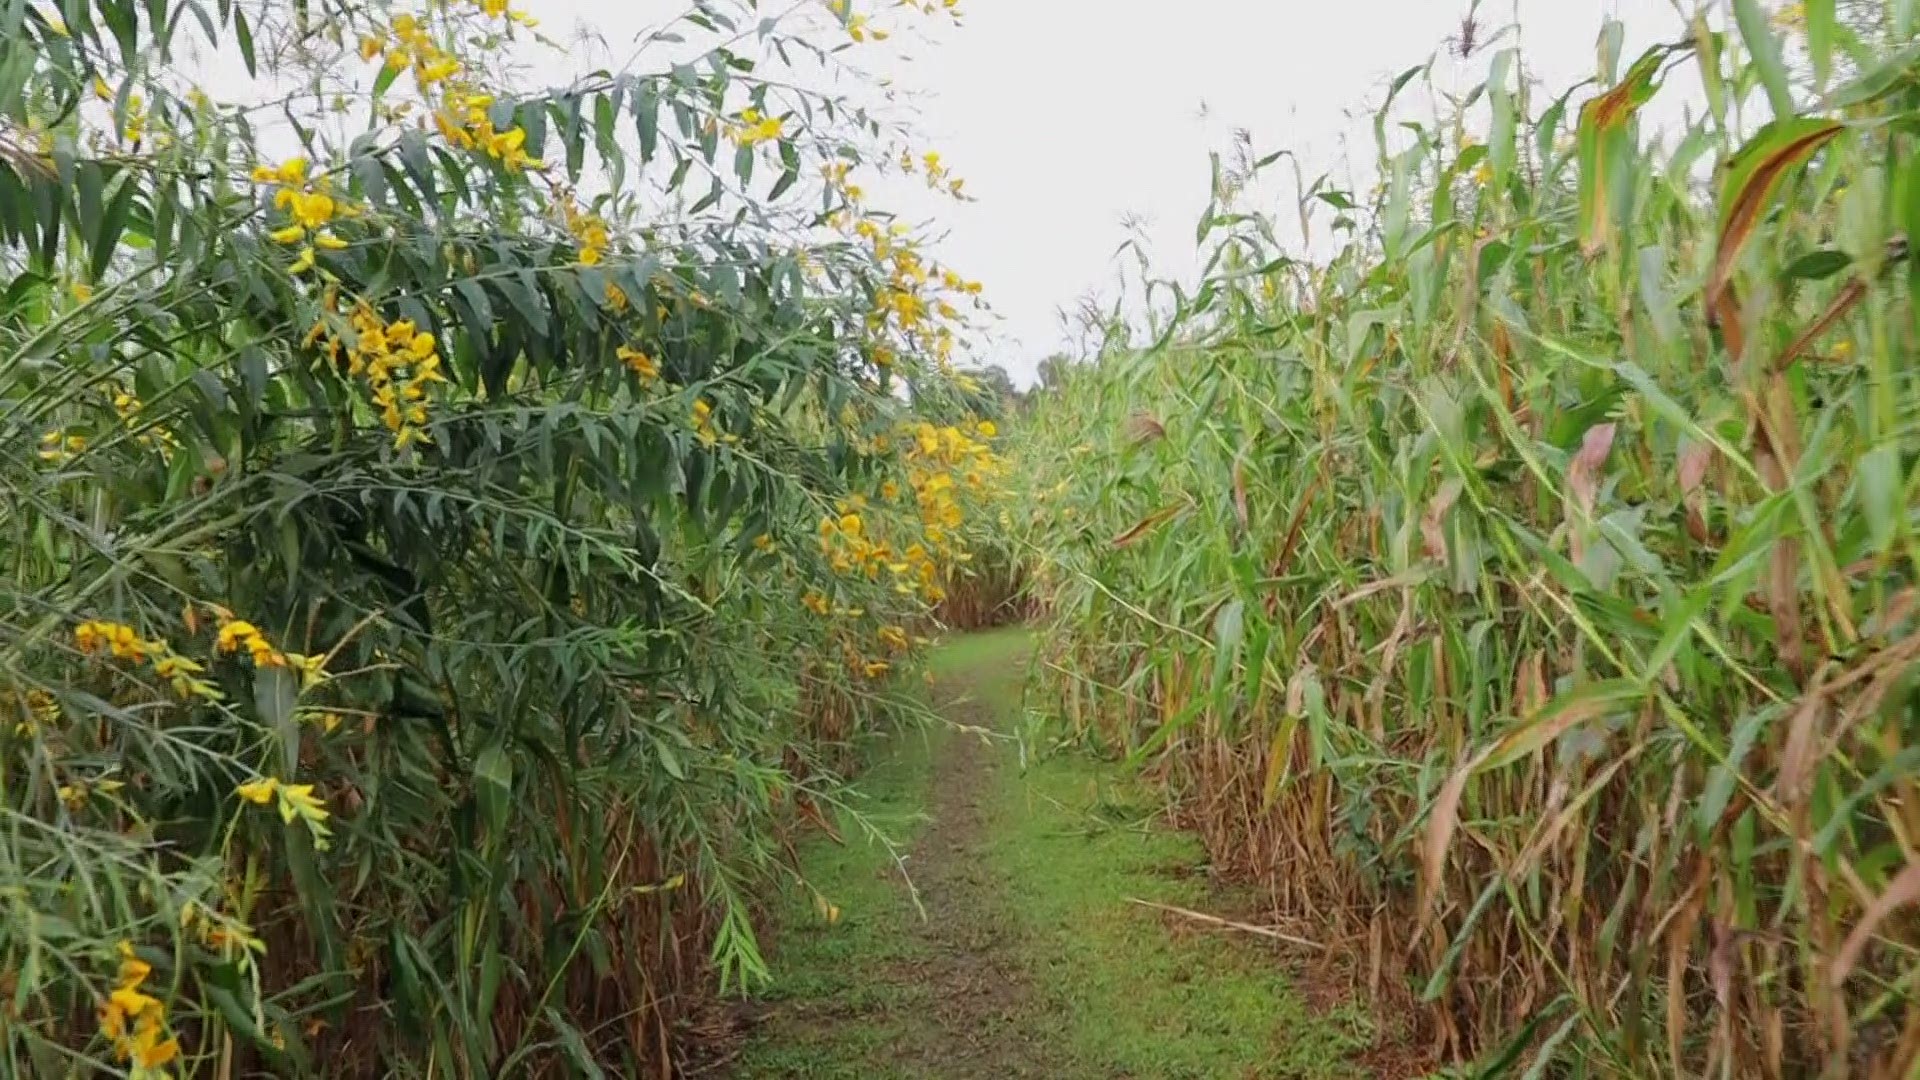 One of the best ways to enjoy the cooler weather is to get lost in a corn maze.